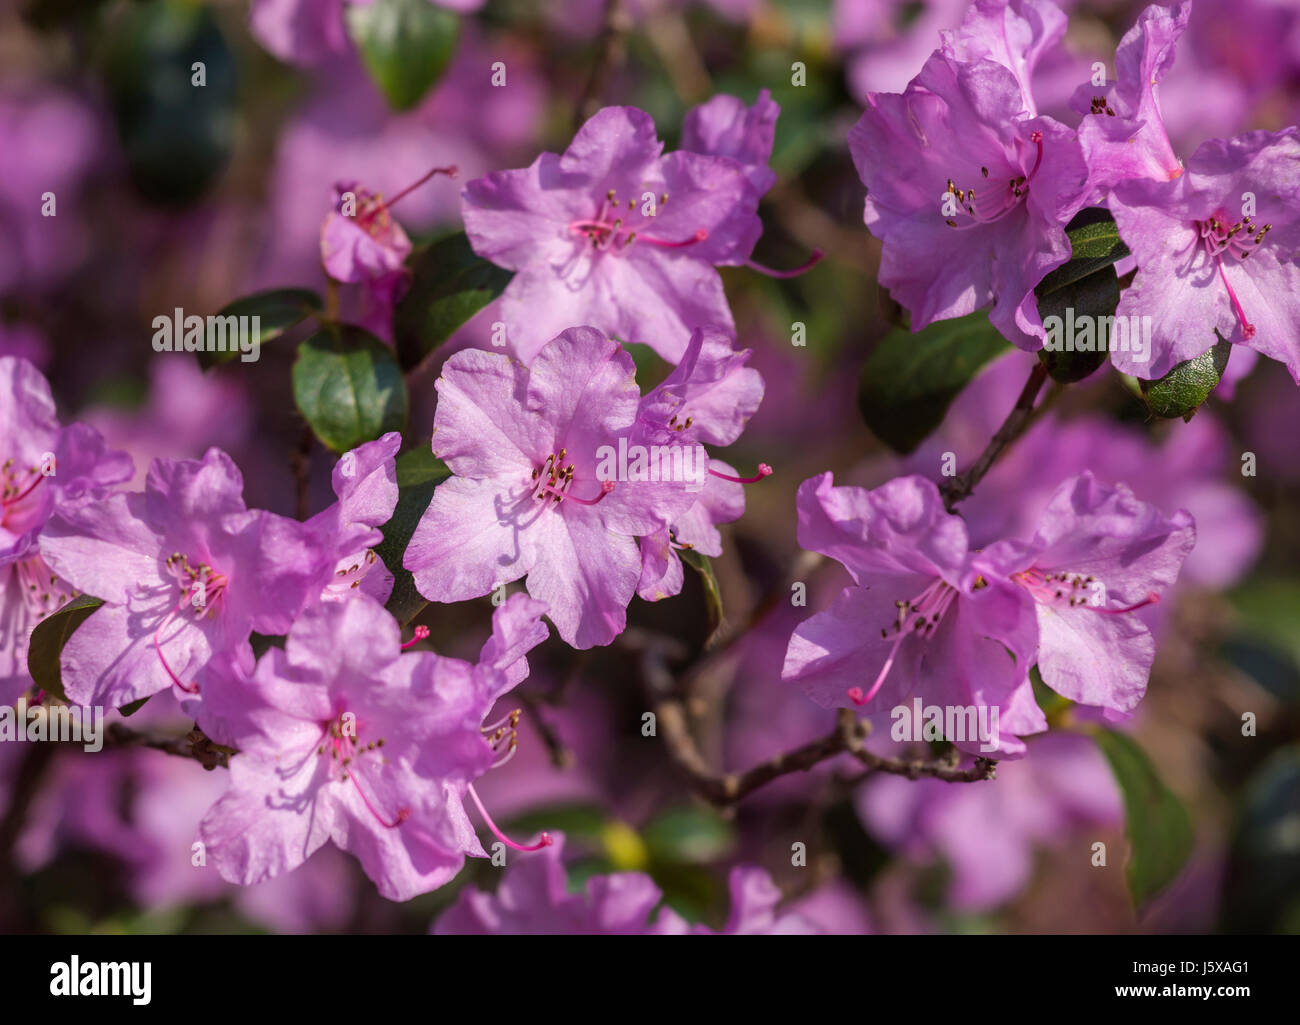 Rhododendron, Rhododendron 'Praecox' , Mauve coloured flowers growing outdoor. Stock Photo